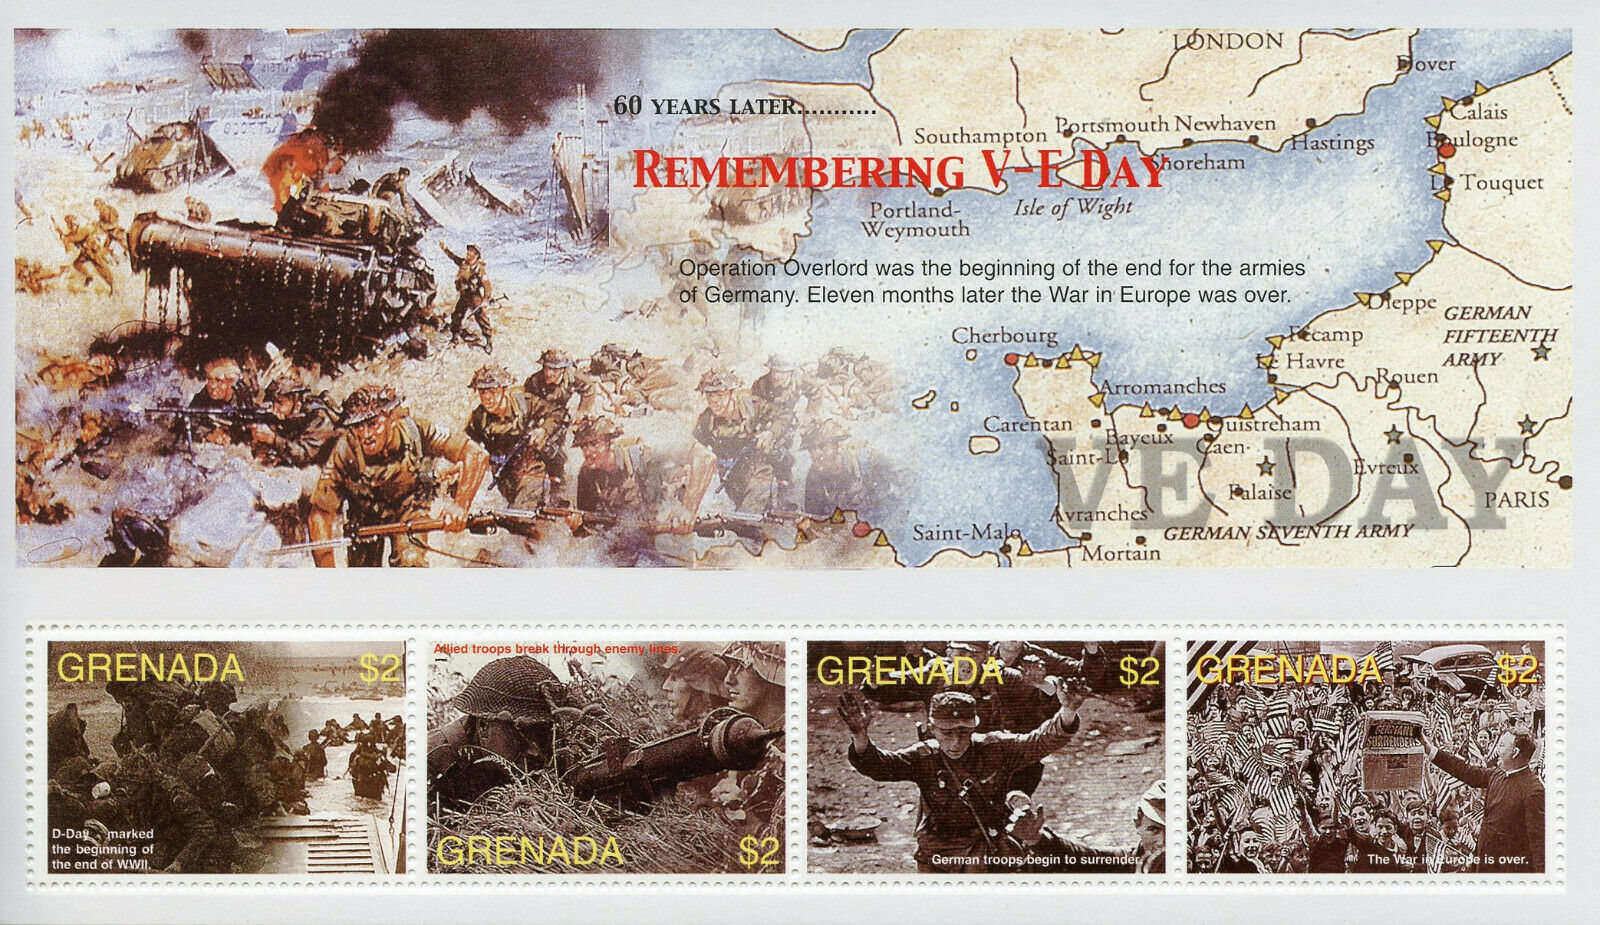 Grenada Military Stamps 2005 MNH WWII WW2 VE Day End World War II D-Day 4v M/S